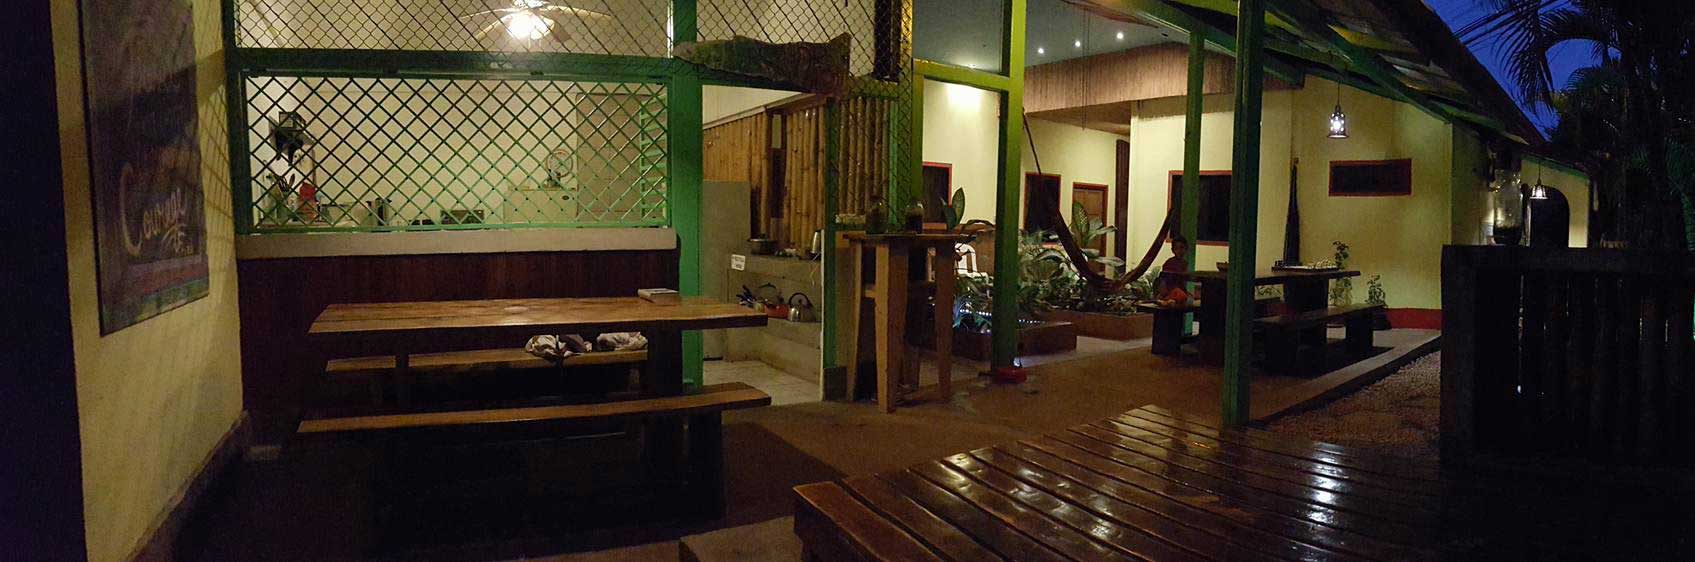 Panorama from the sun terrace of community kitchen and lounge area at night in Indra Inn